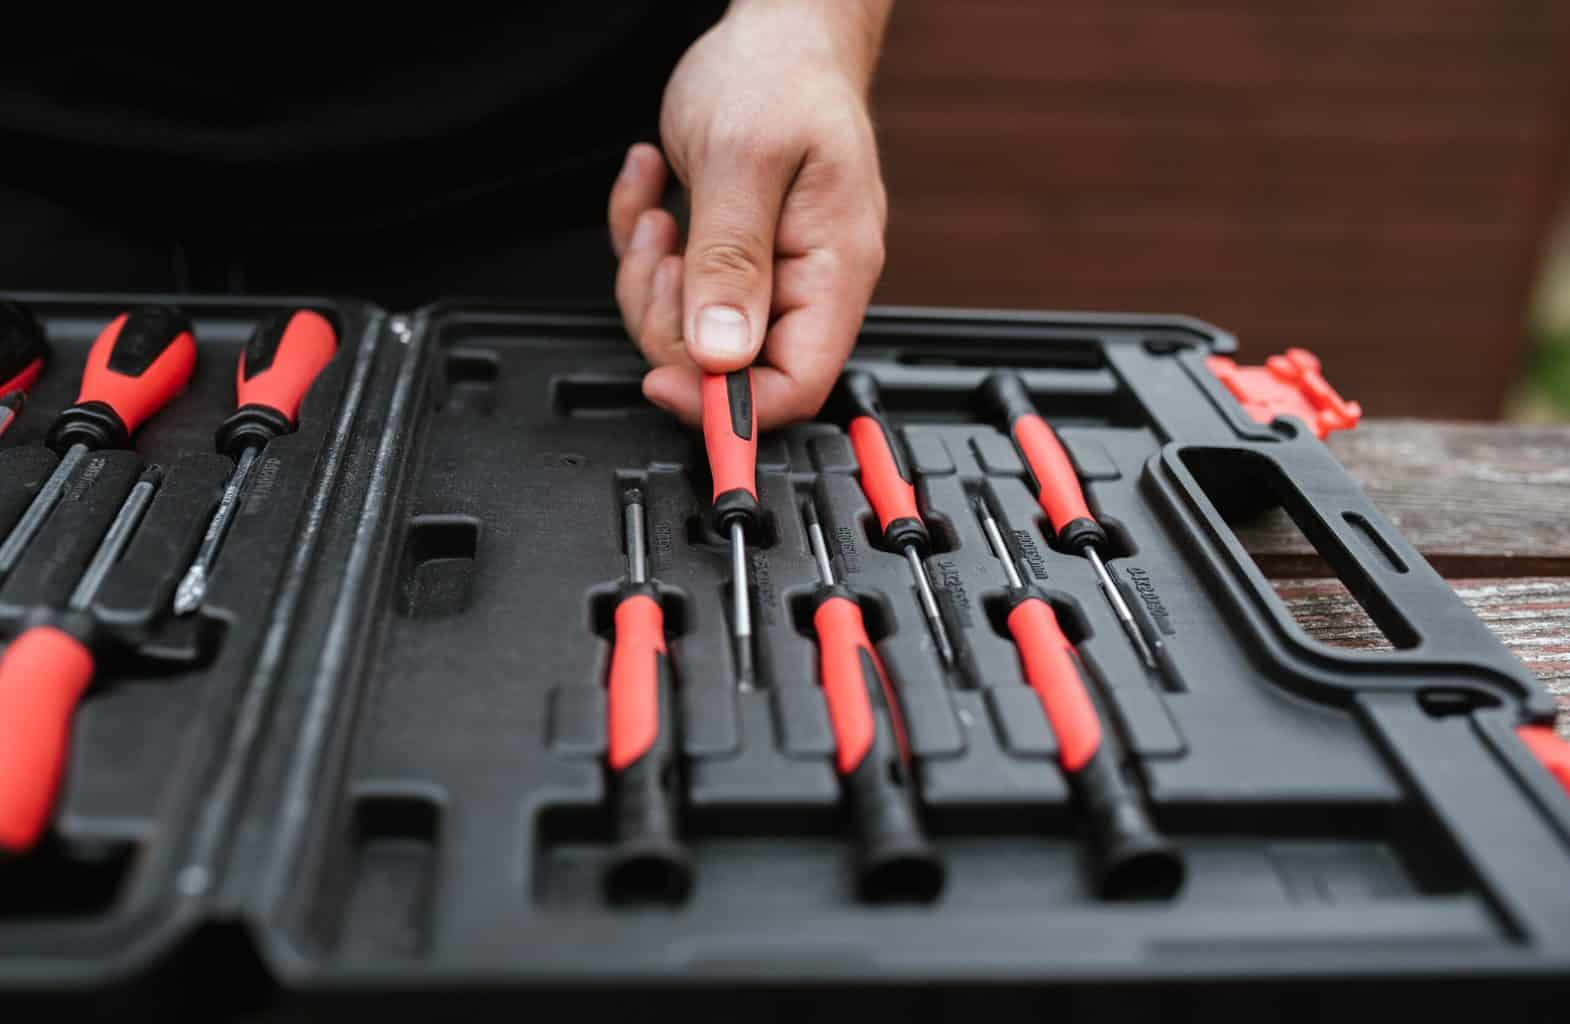 A hand pulling a screwdriver out of a toolbox